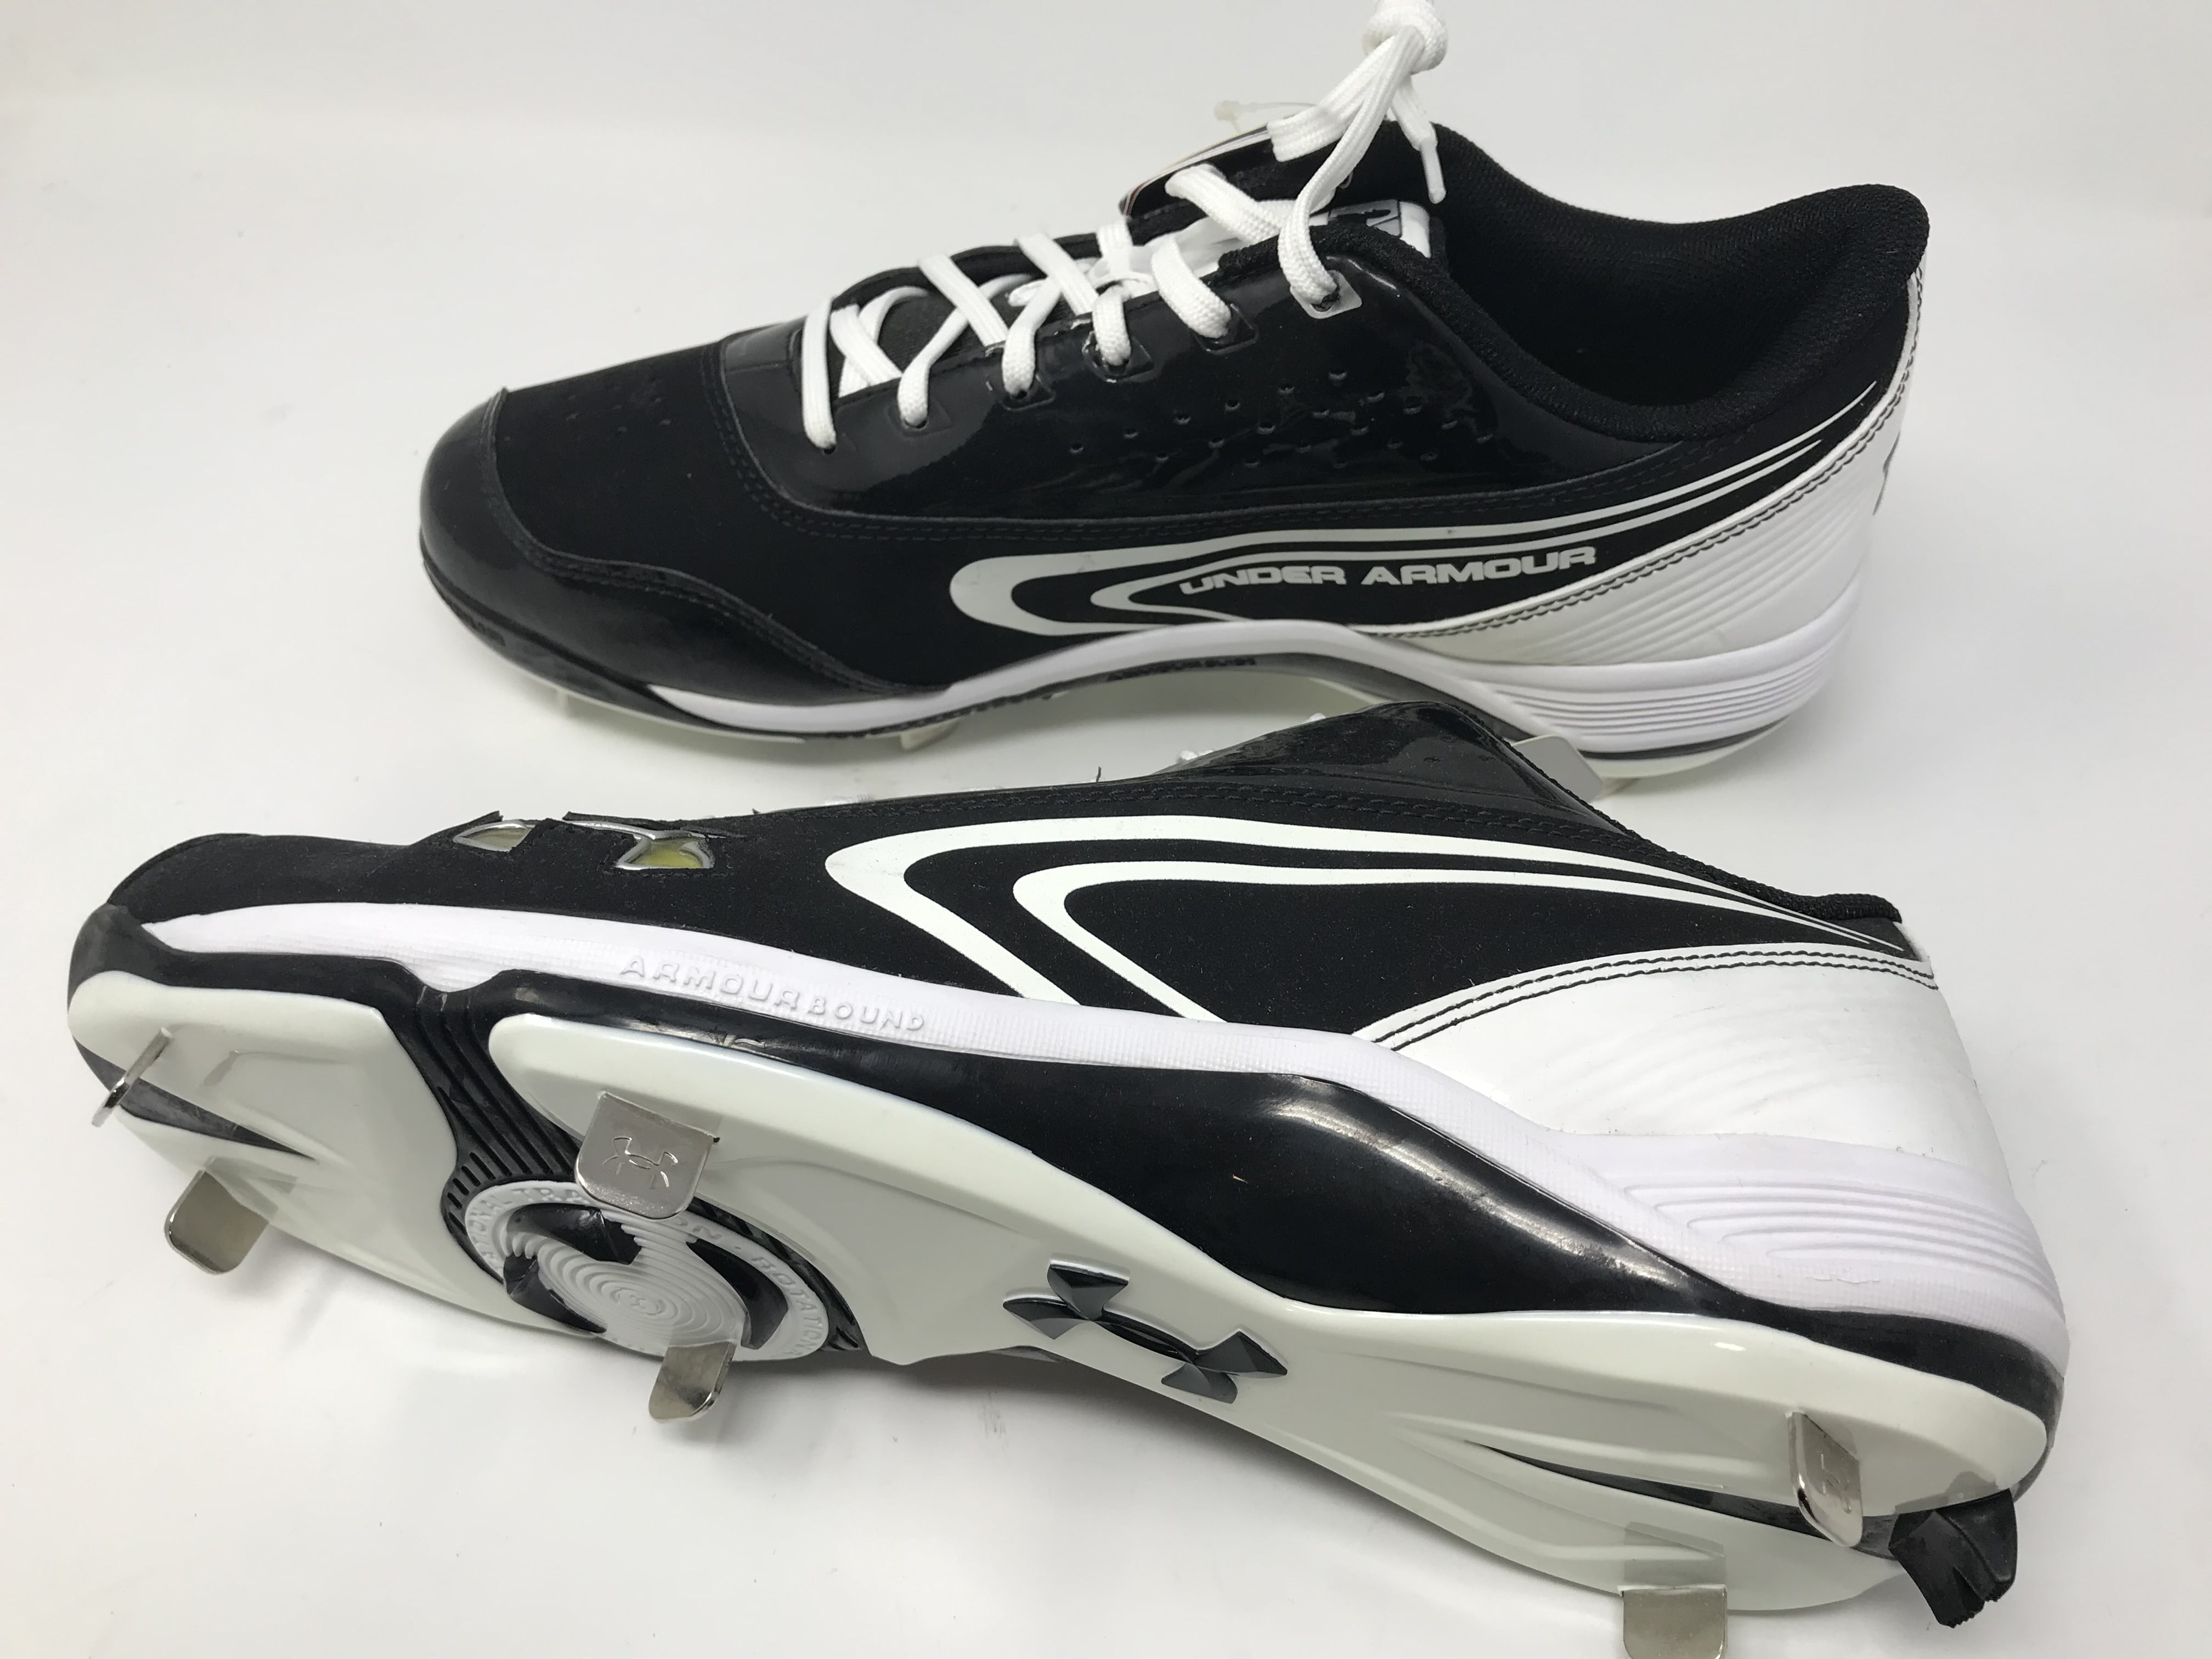 New Under Armour Men's 10 Ignite III Low ST CC Baseball Cleats White/Black 